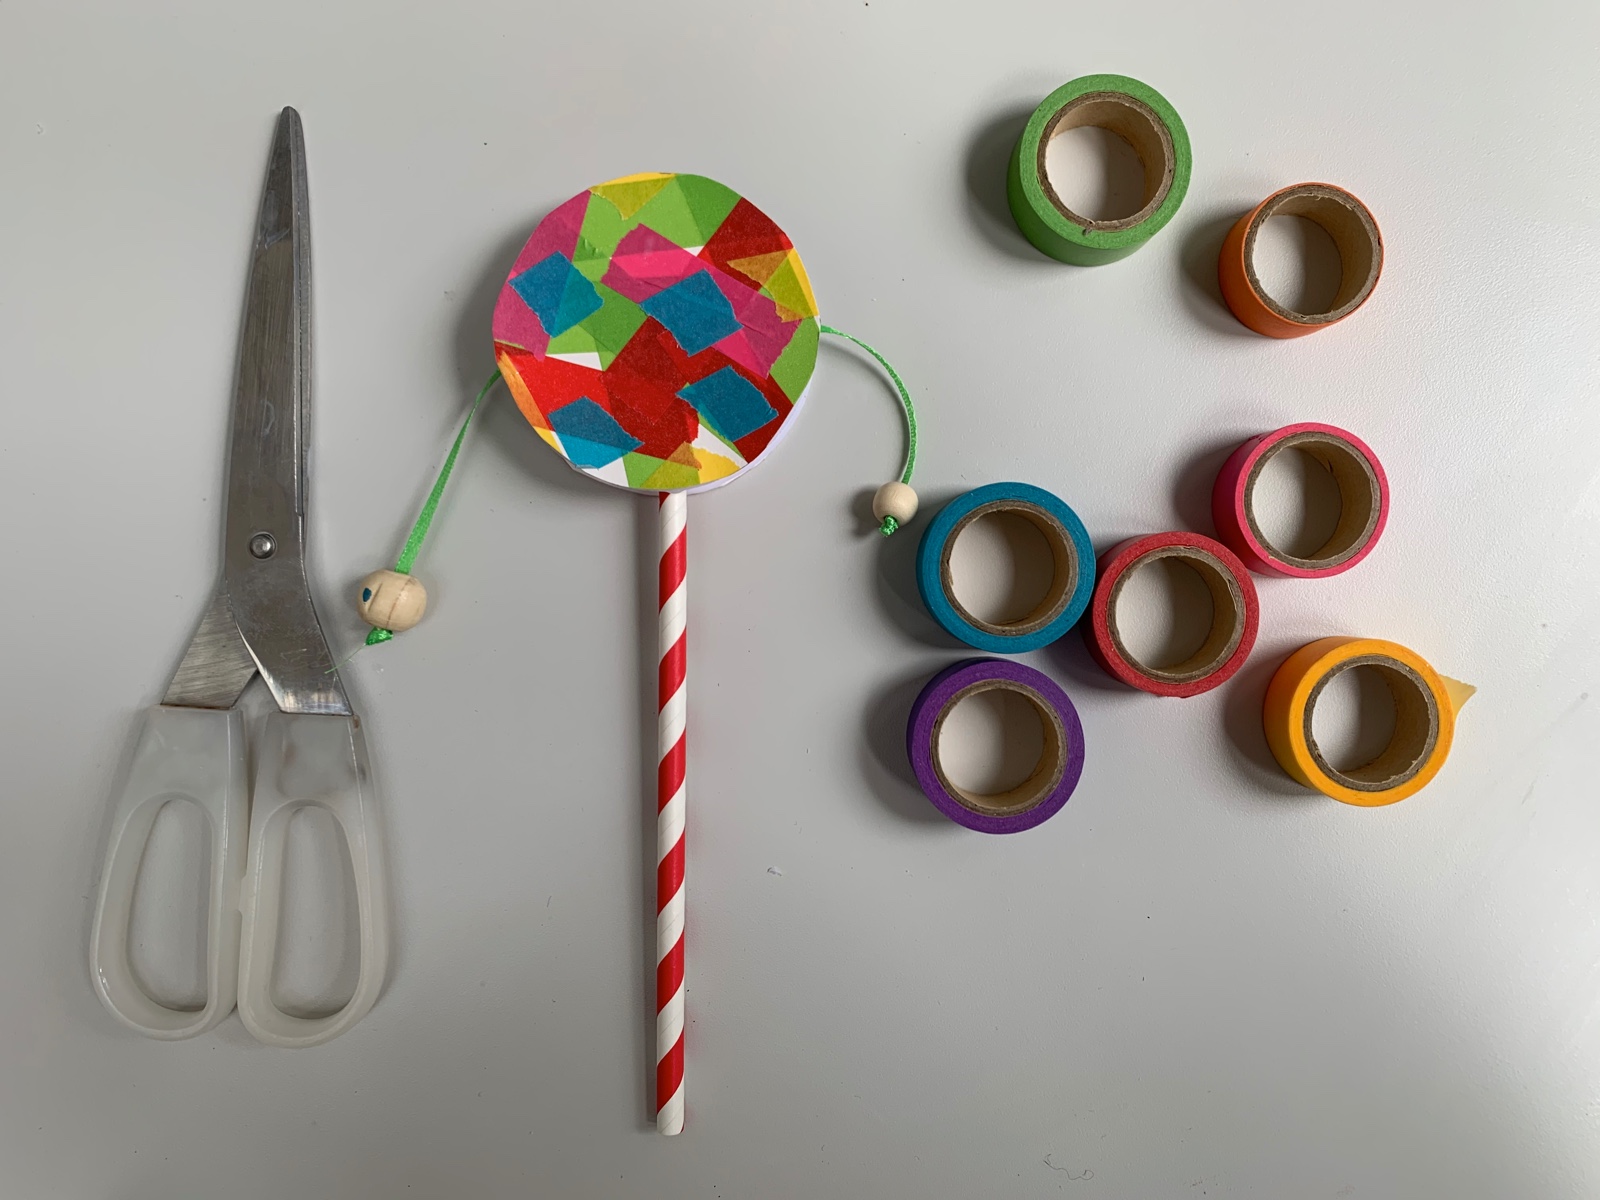 Music Crafts For Kids - How To Make Your Own Instrument - S&S Blog